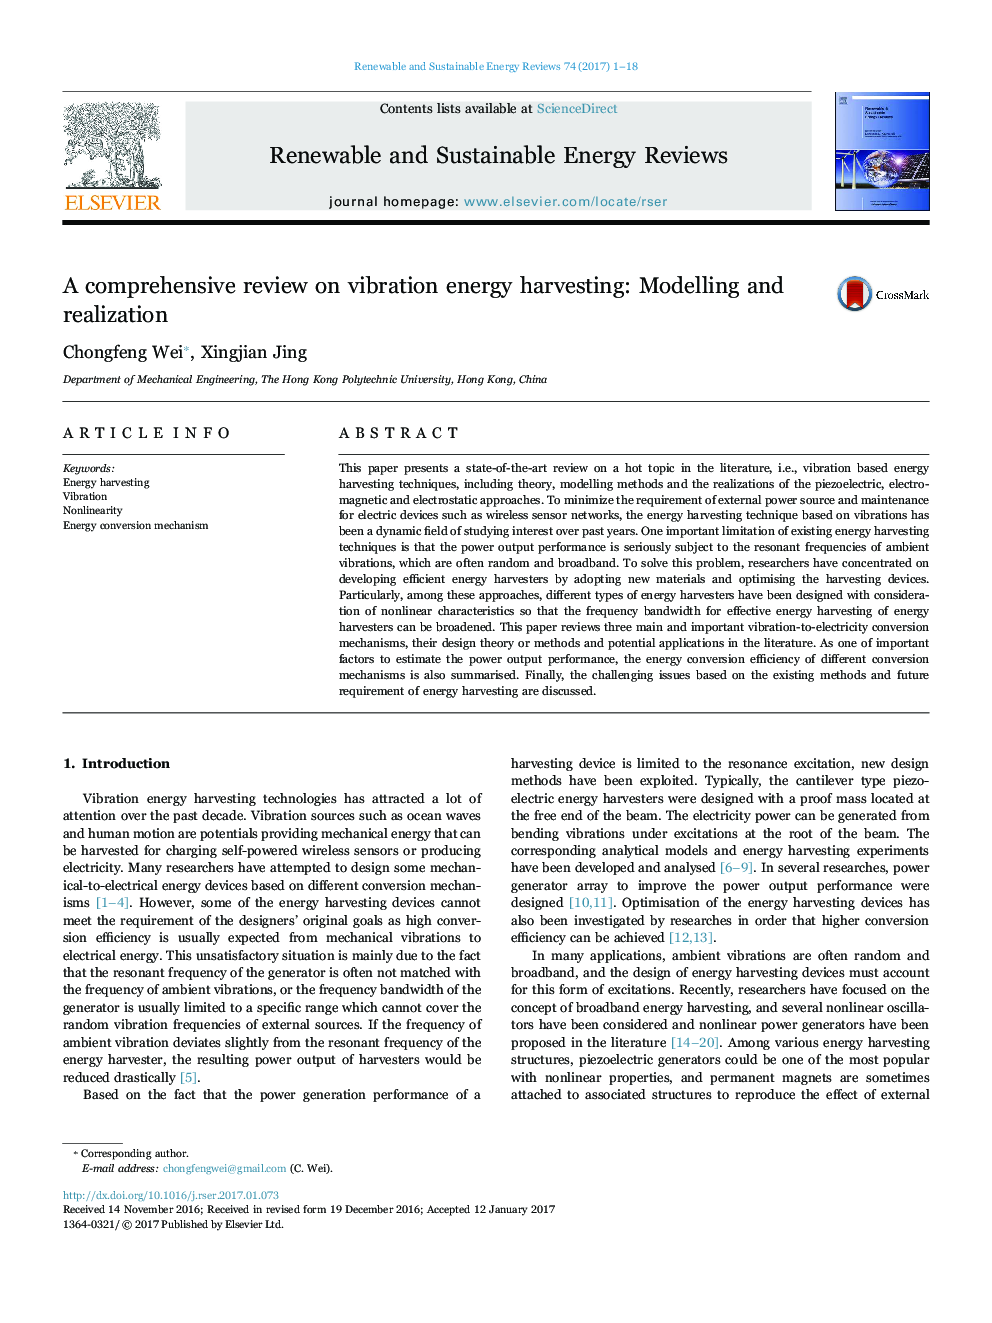 A comprehensive review on vibration energy harvesting: Modelling and realization